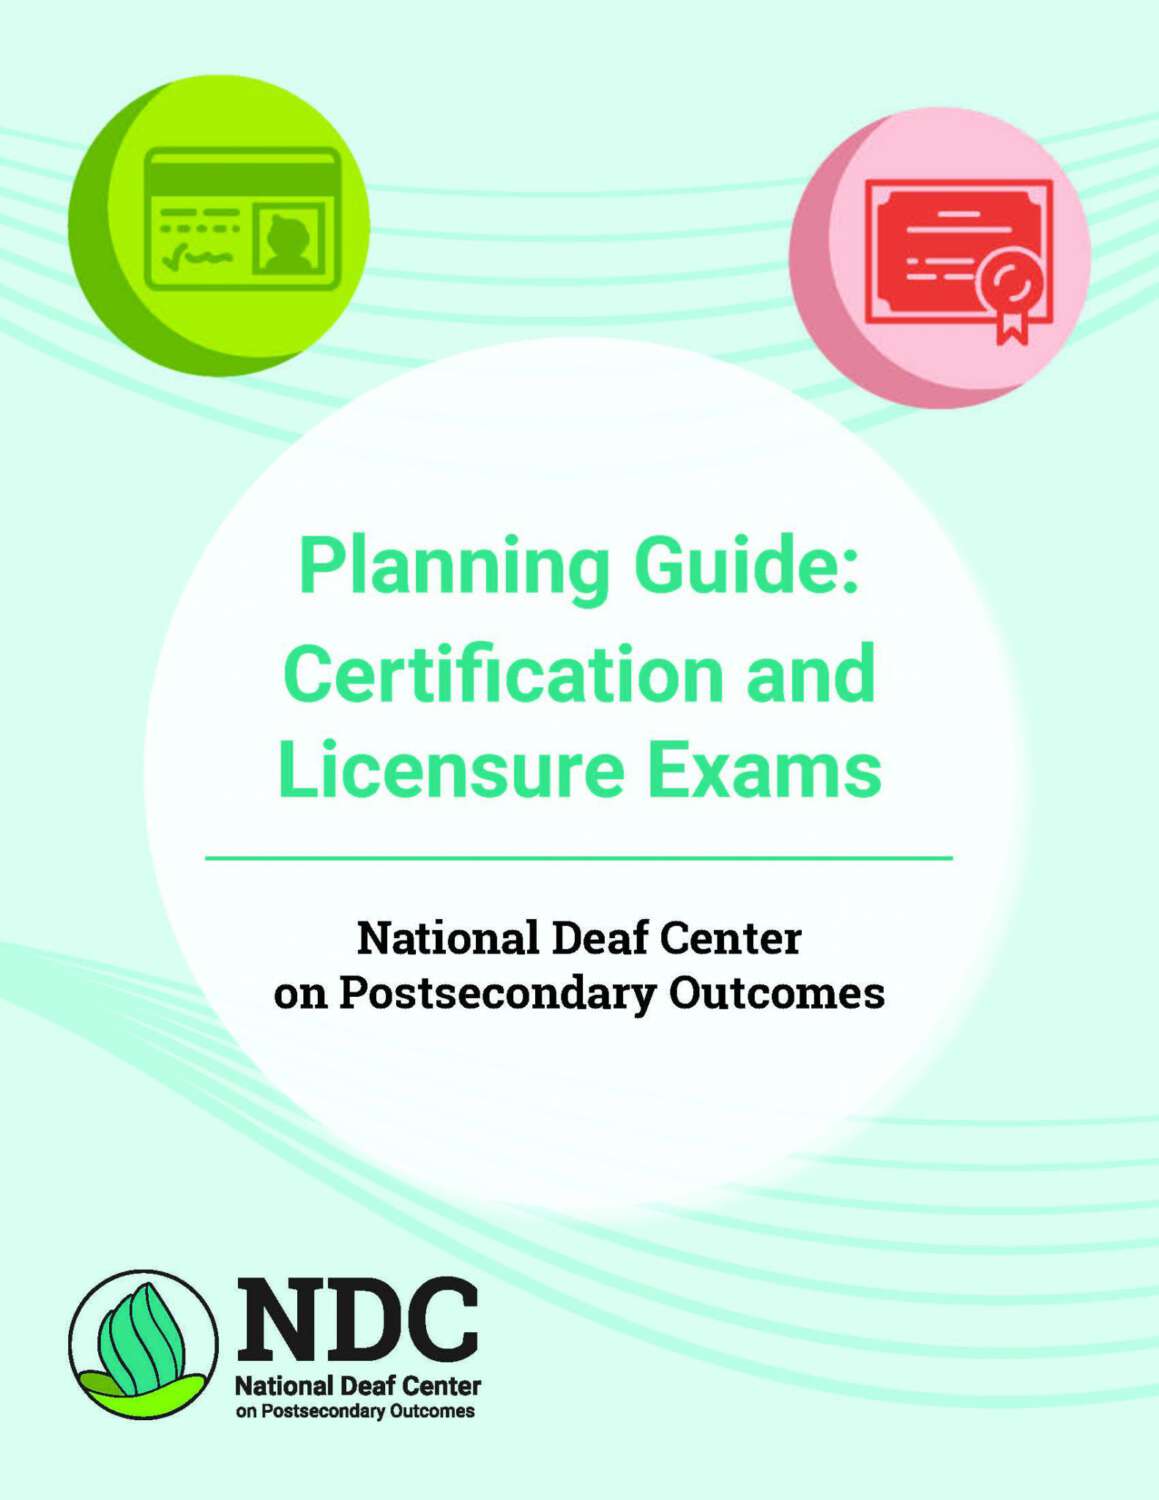 This image has a light green background. On the top left, there is a green circle with an image of an identity card in it, while on the top right there is a pink circle with an image of a certificate. In the center, there is a Big white circle with the text" Planning Guide: Certification and Licensure Exams. National Deaf Center on Postsecondary Outcomes. At the bottom left there is the logo of NDC.